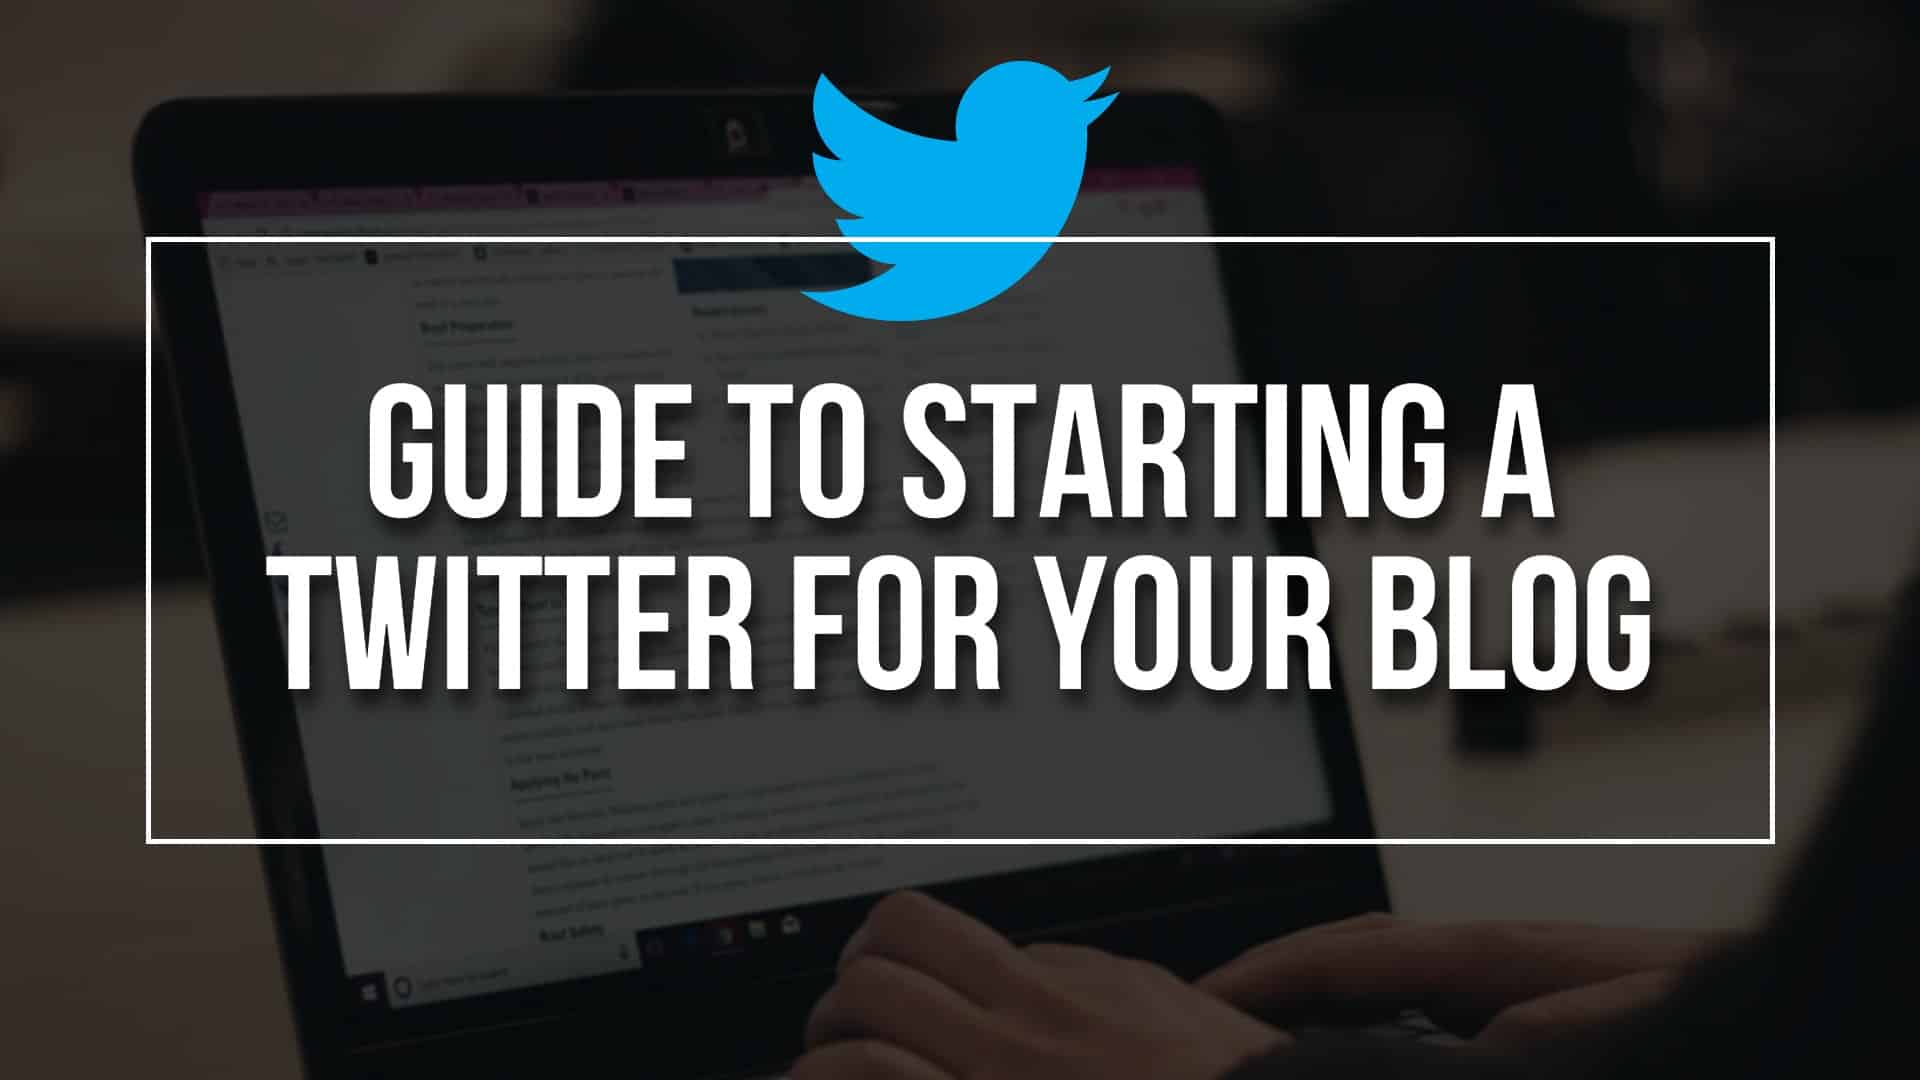 The Best Twitter Starters Guide for Beginners - Buy Followers Guide